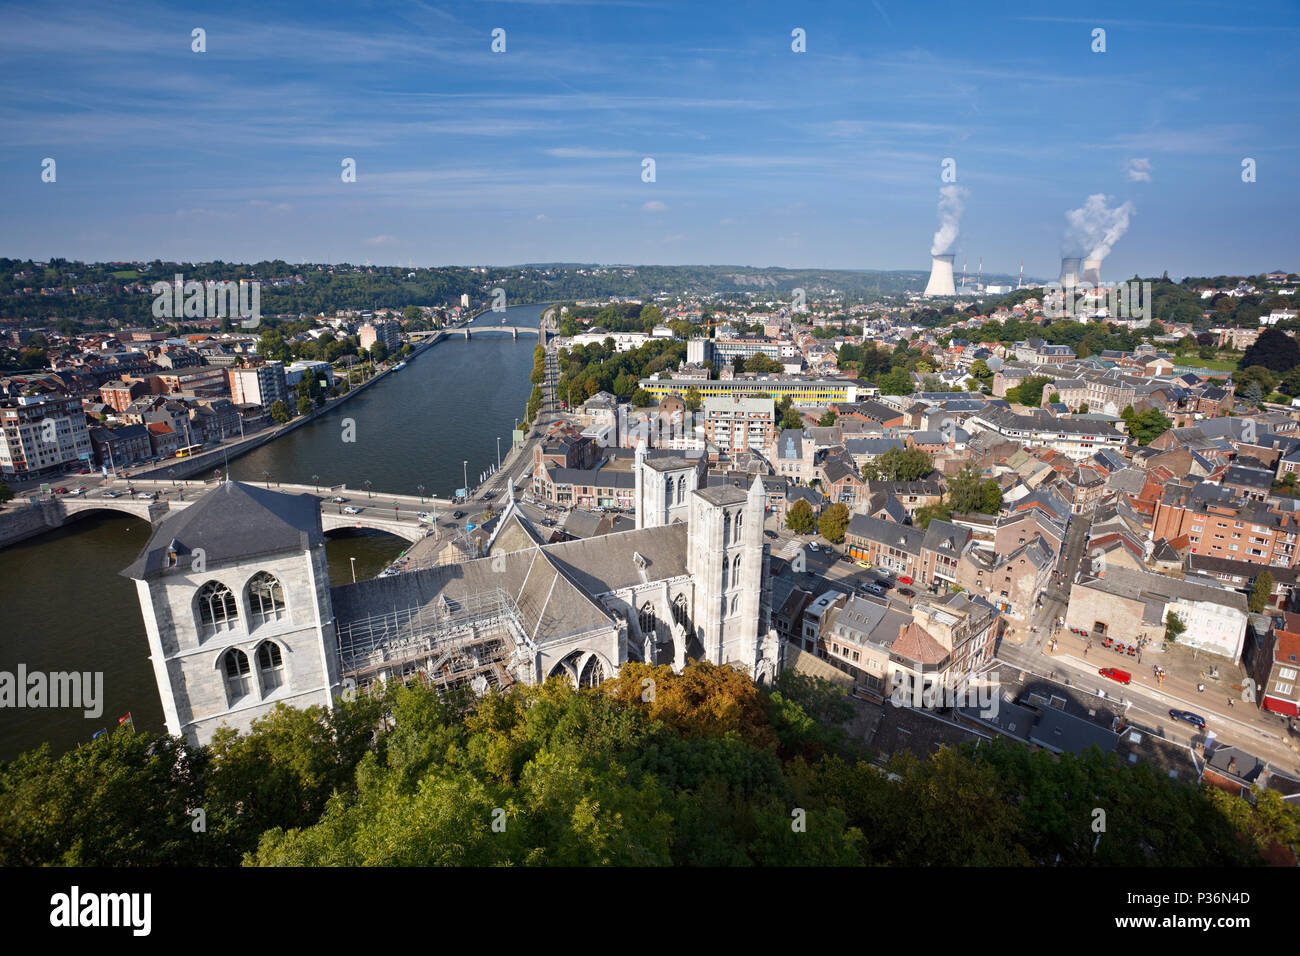 View Over Cathedral And City Of Huy In Belgium At Meuse River To A Distant Nuclear Power Station Stock Photo Alamy